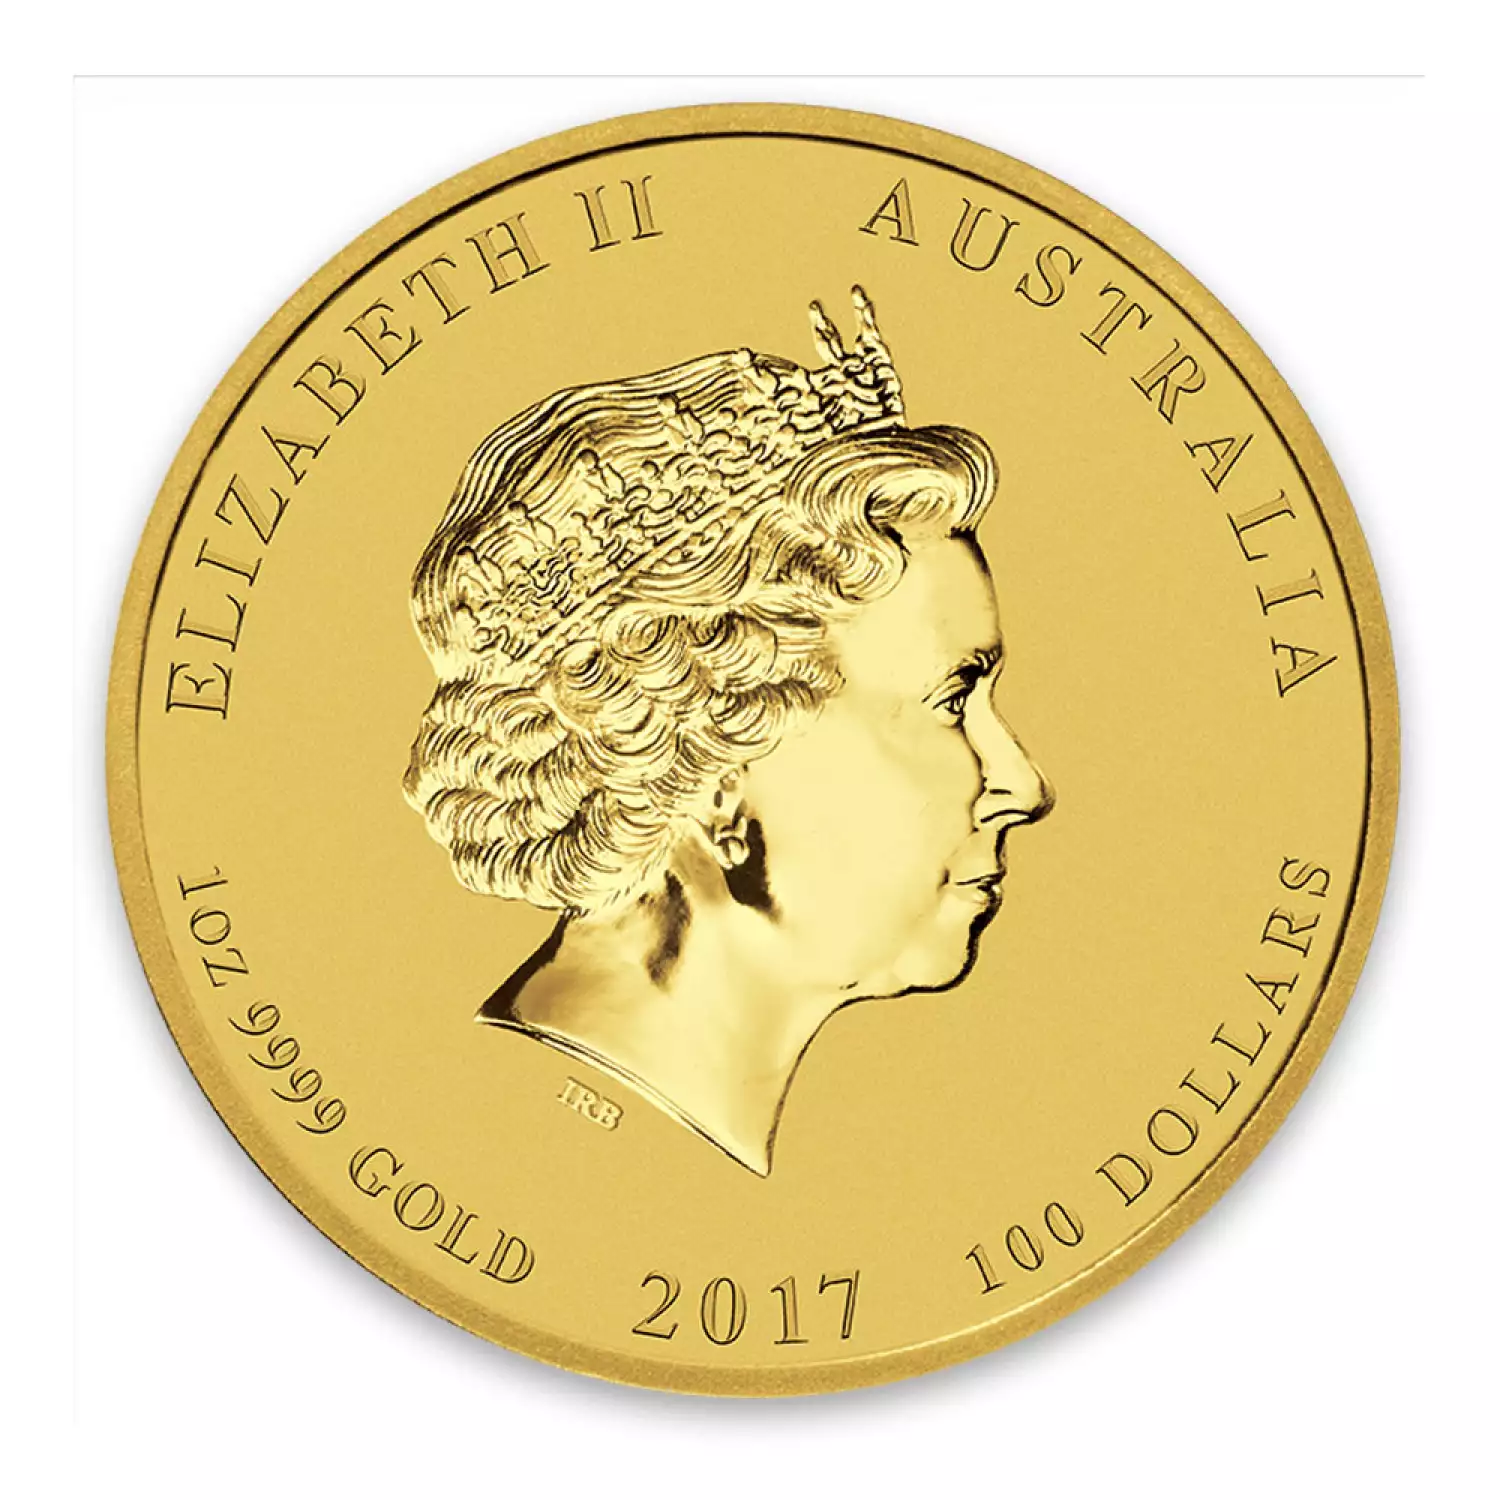 2017 1oz Australian Perth Mint Gold Lunar II: Year of the Rooster (2)